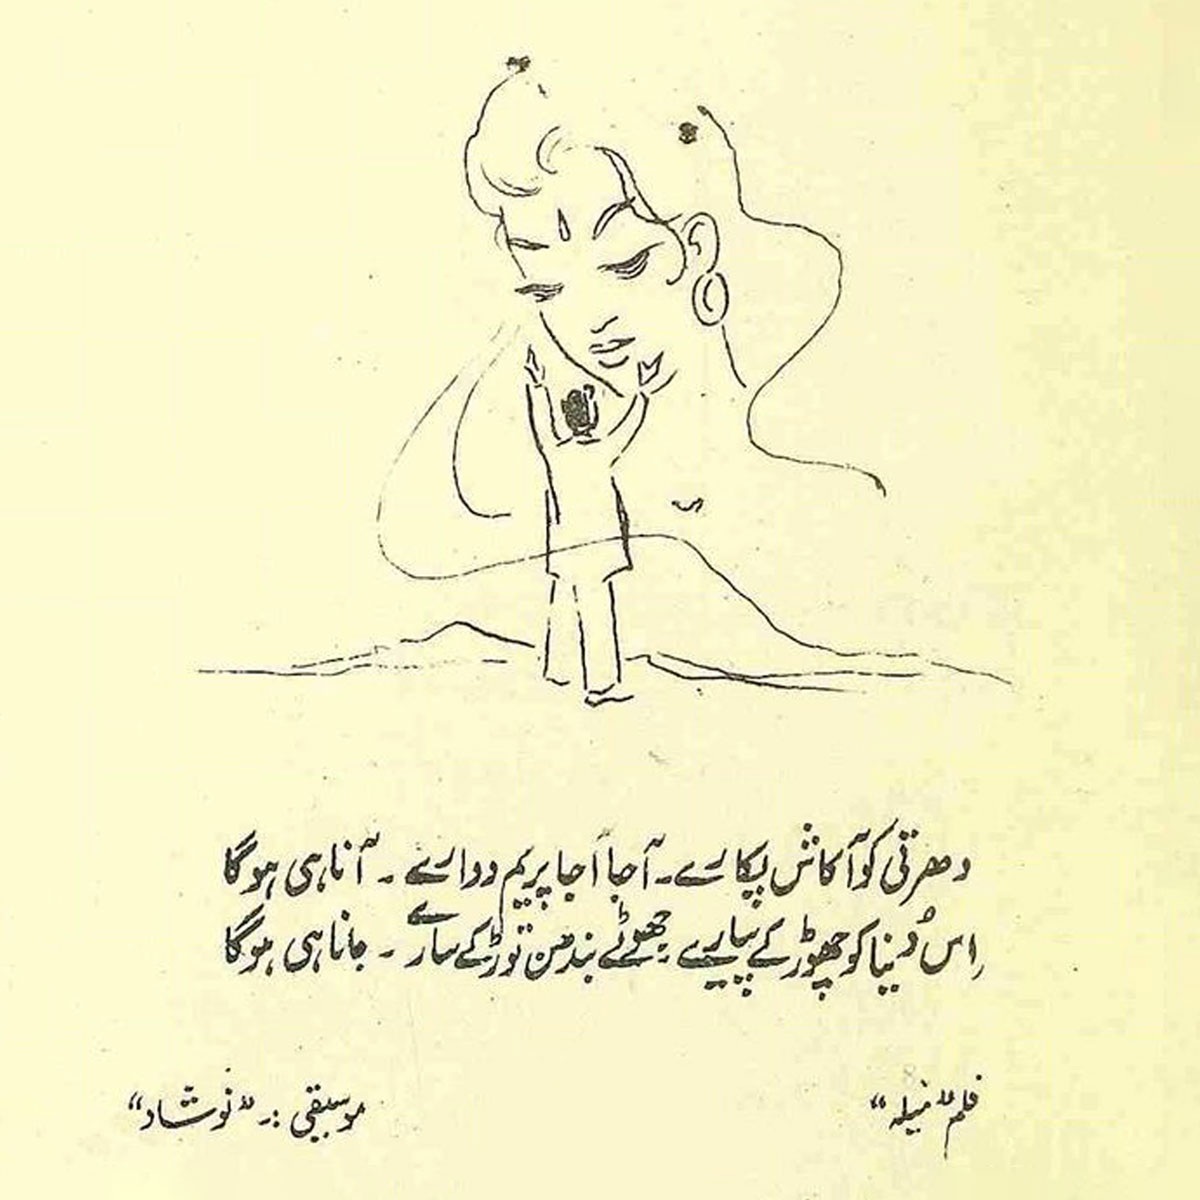 An illustration of "Dharti ko Aakash Pukare" from the film Mela